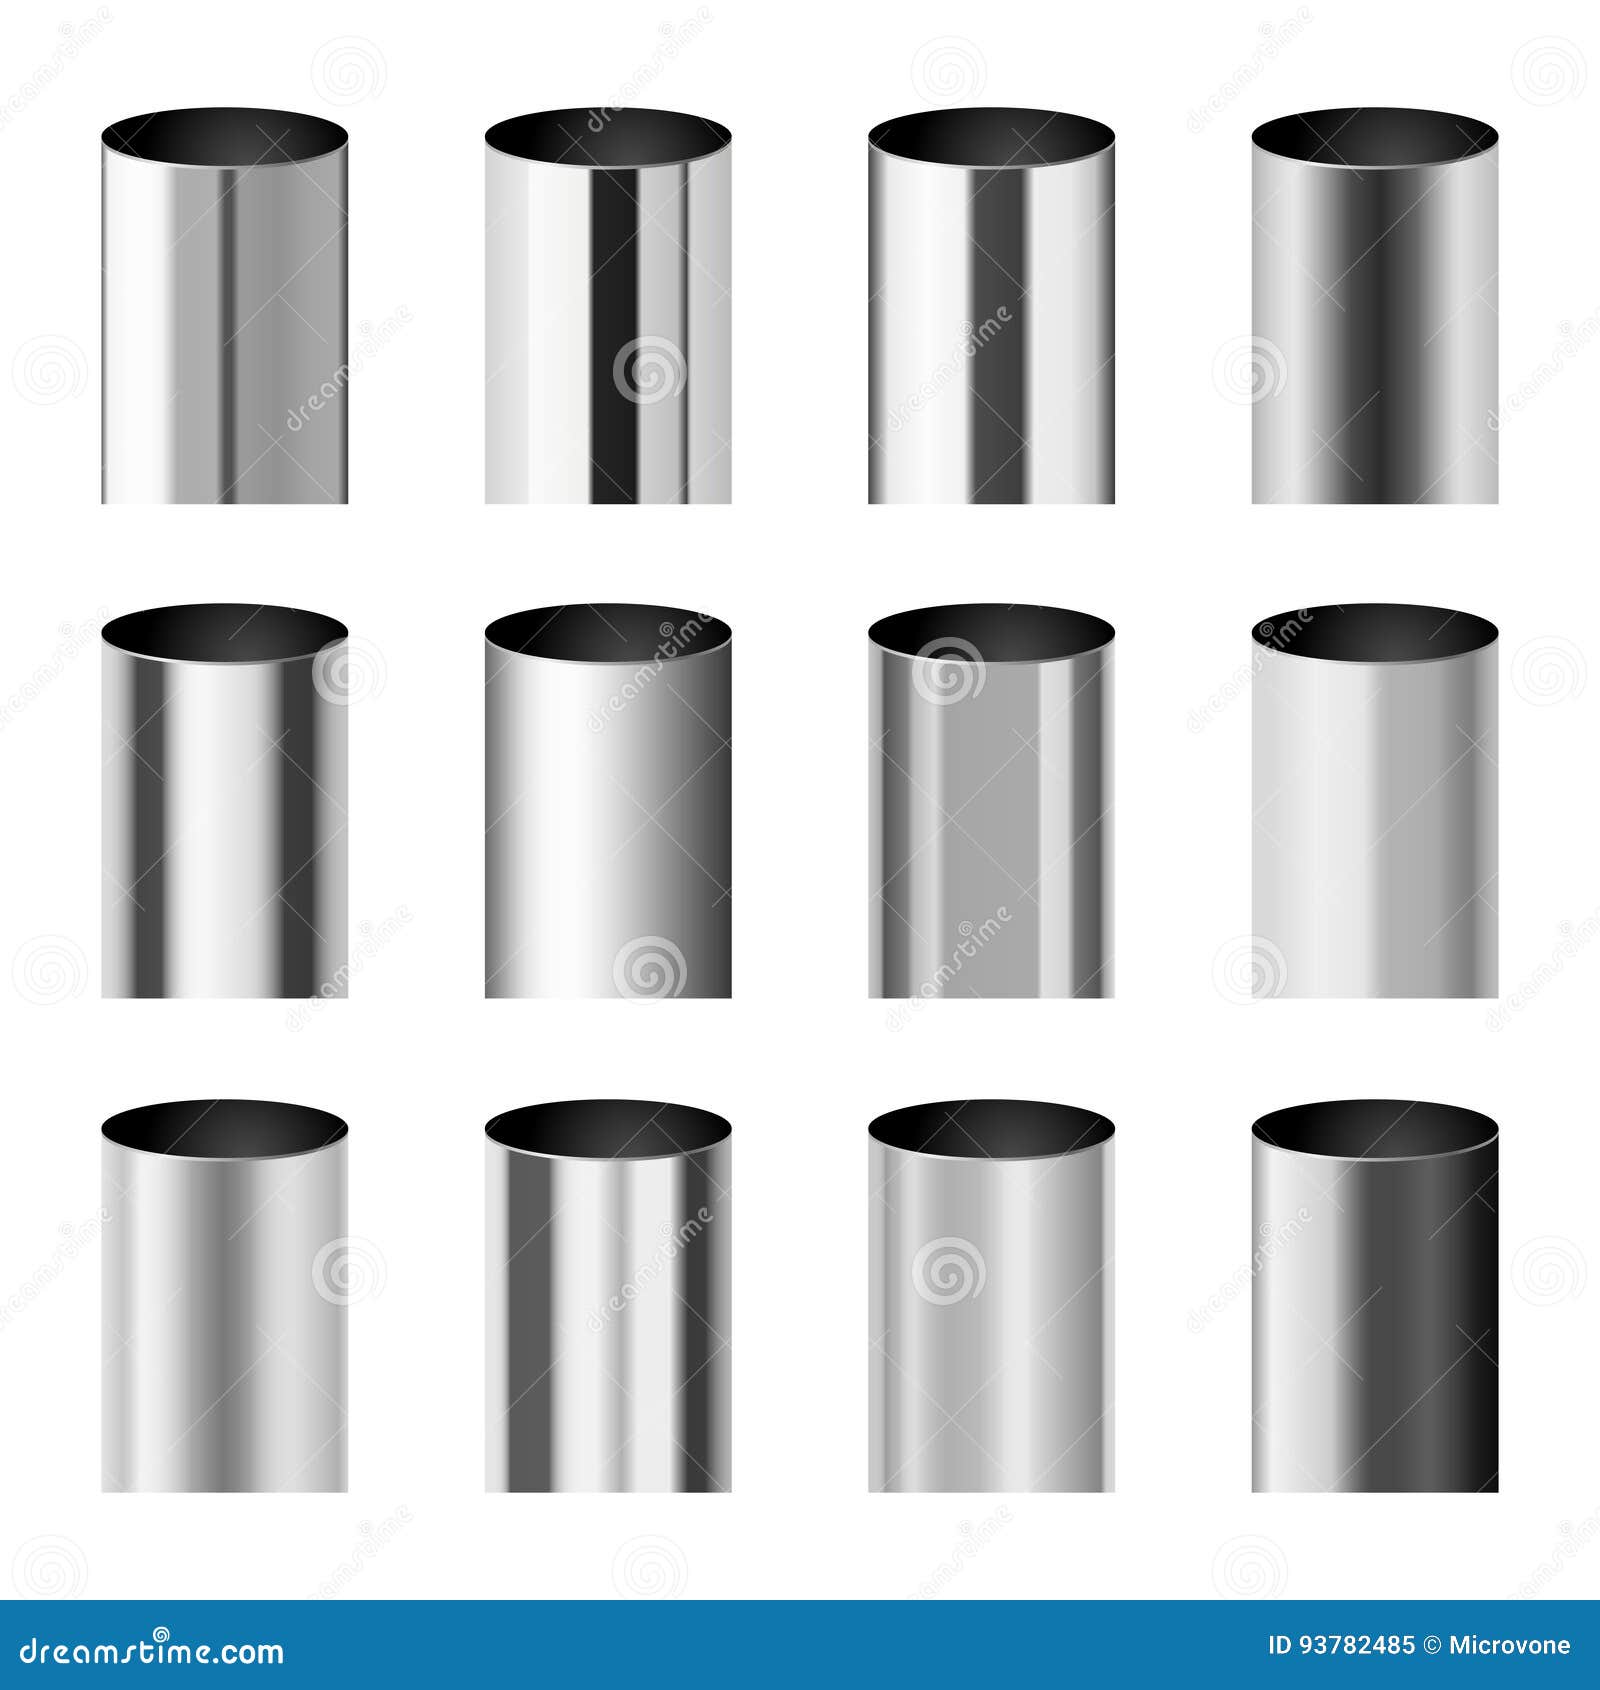 chrome metal polished gradients corresponding to cylinder pipe  set